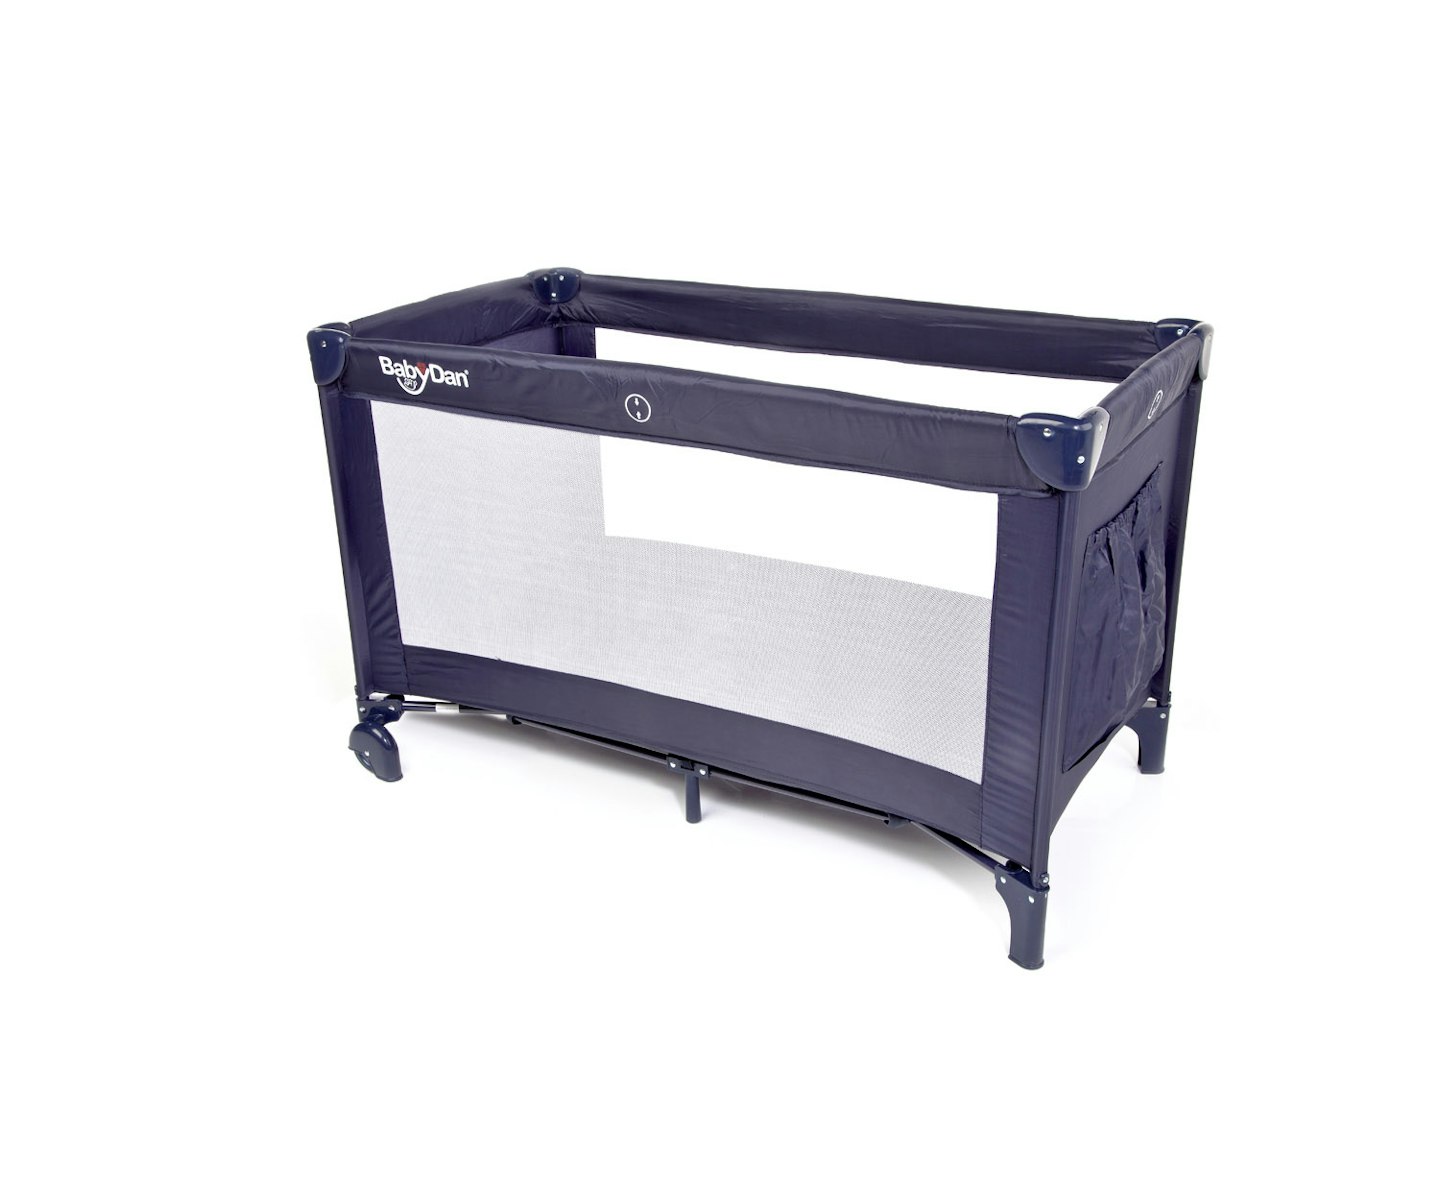 baby dan travel cot assembly